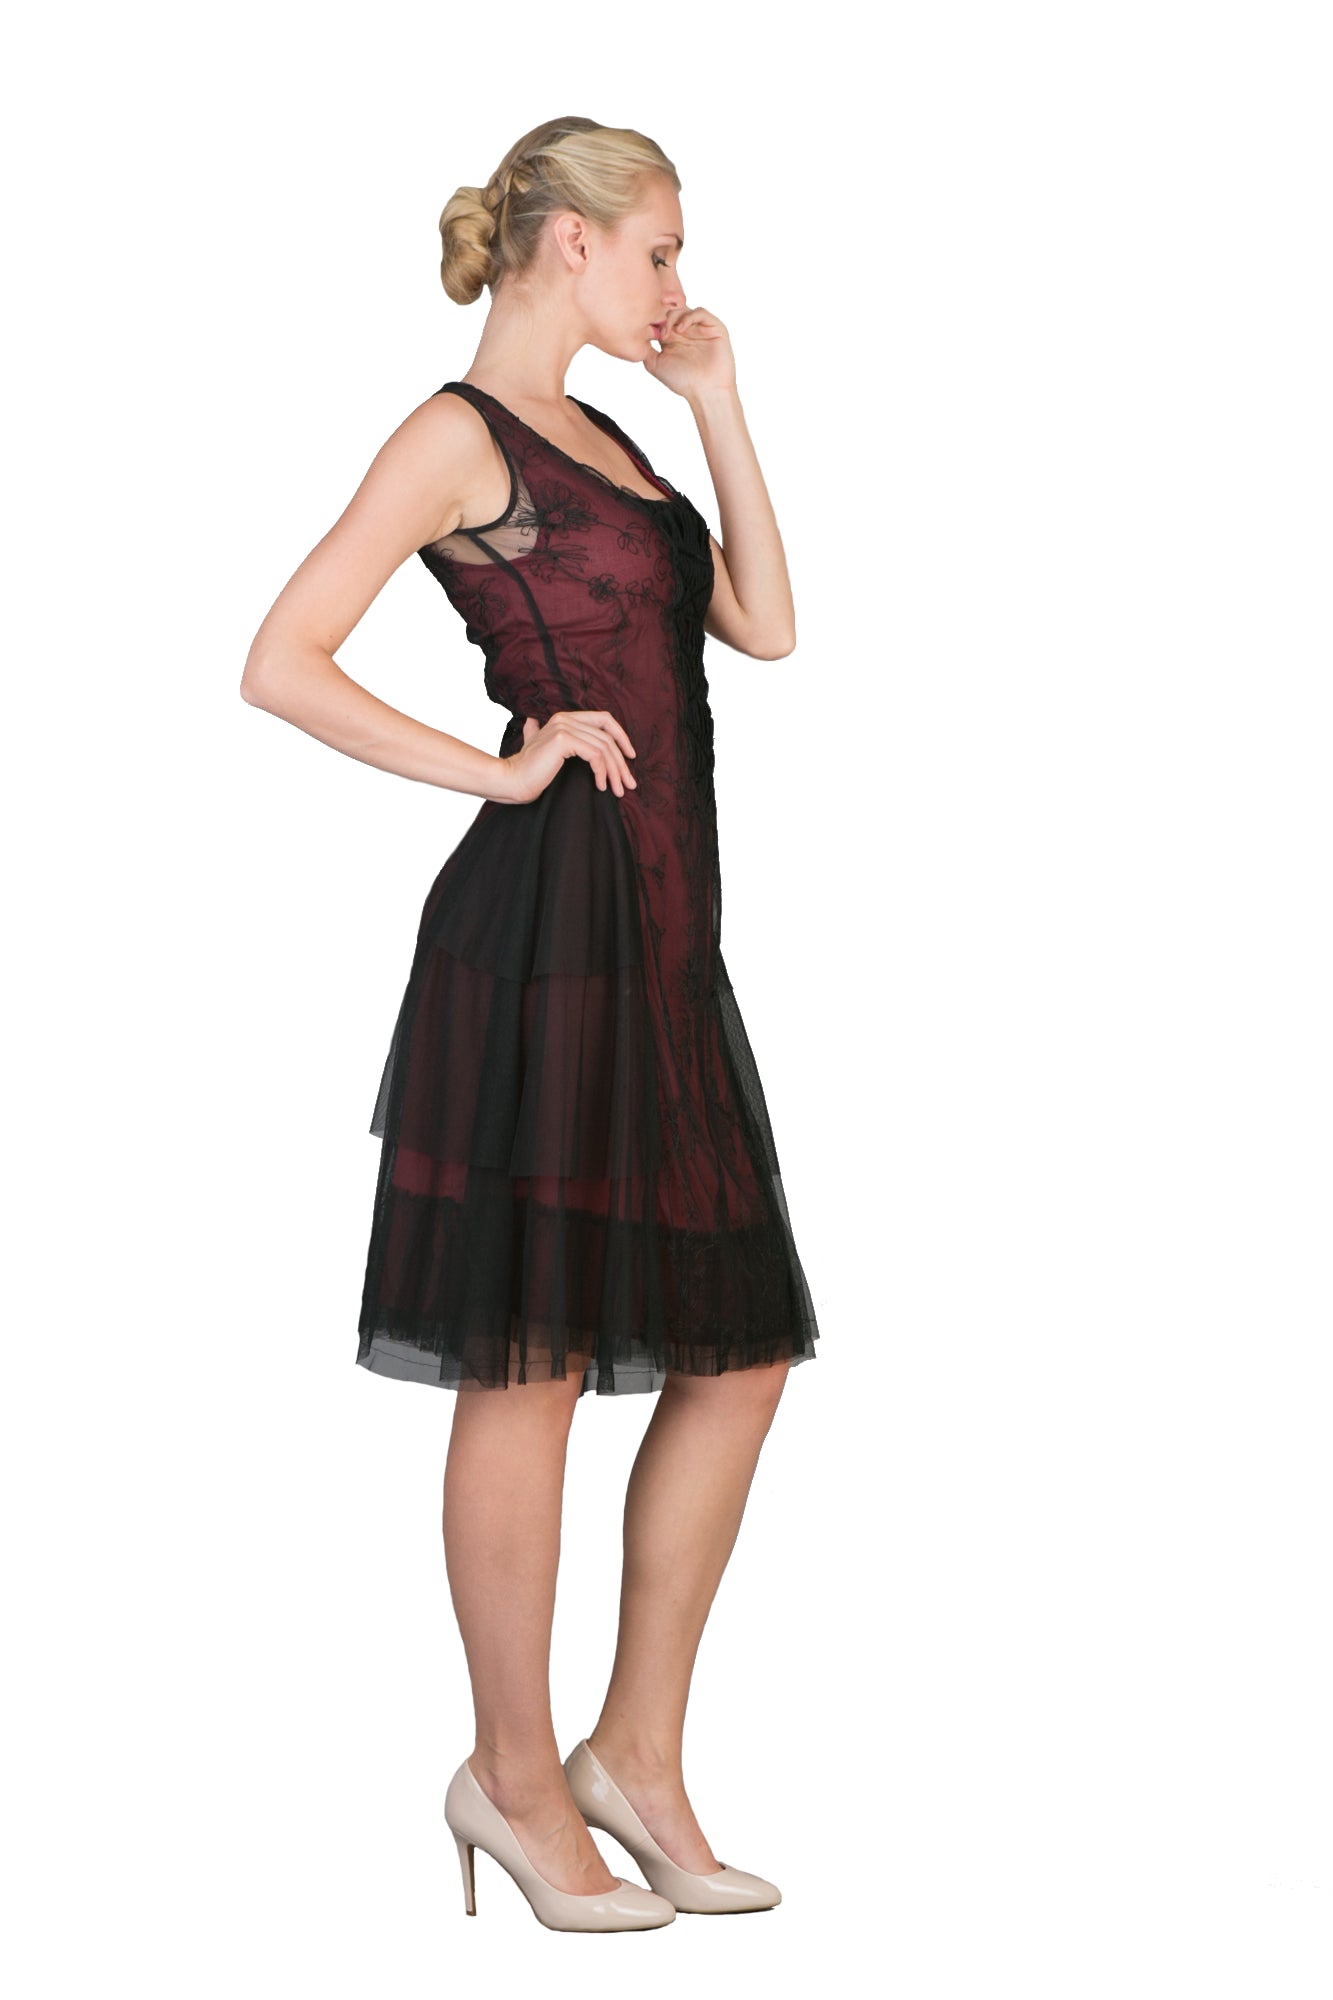 Chic Party Dress in Black-Burgundy by Nataya - SOLD OUT